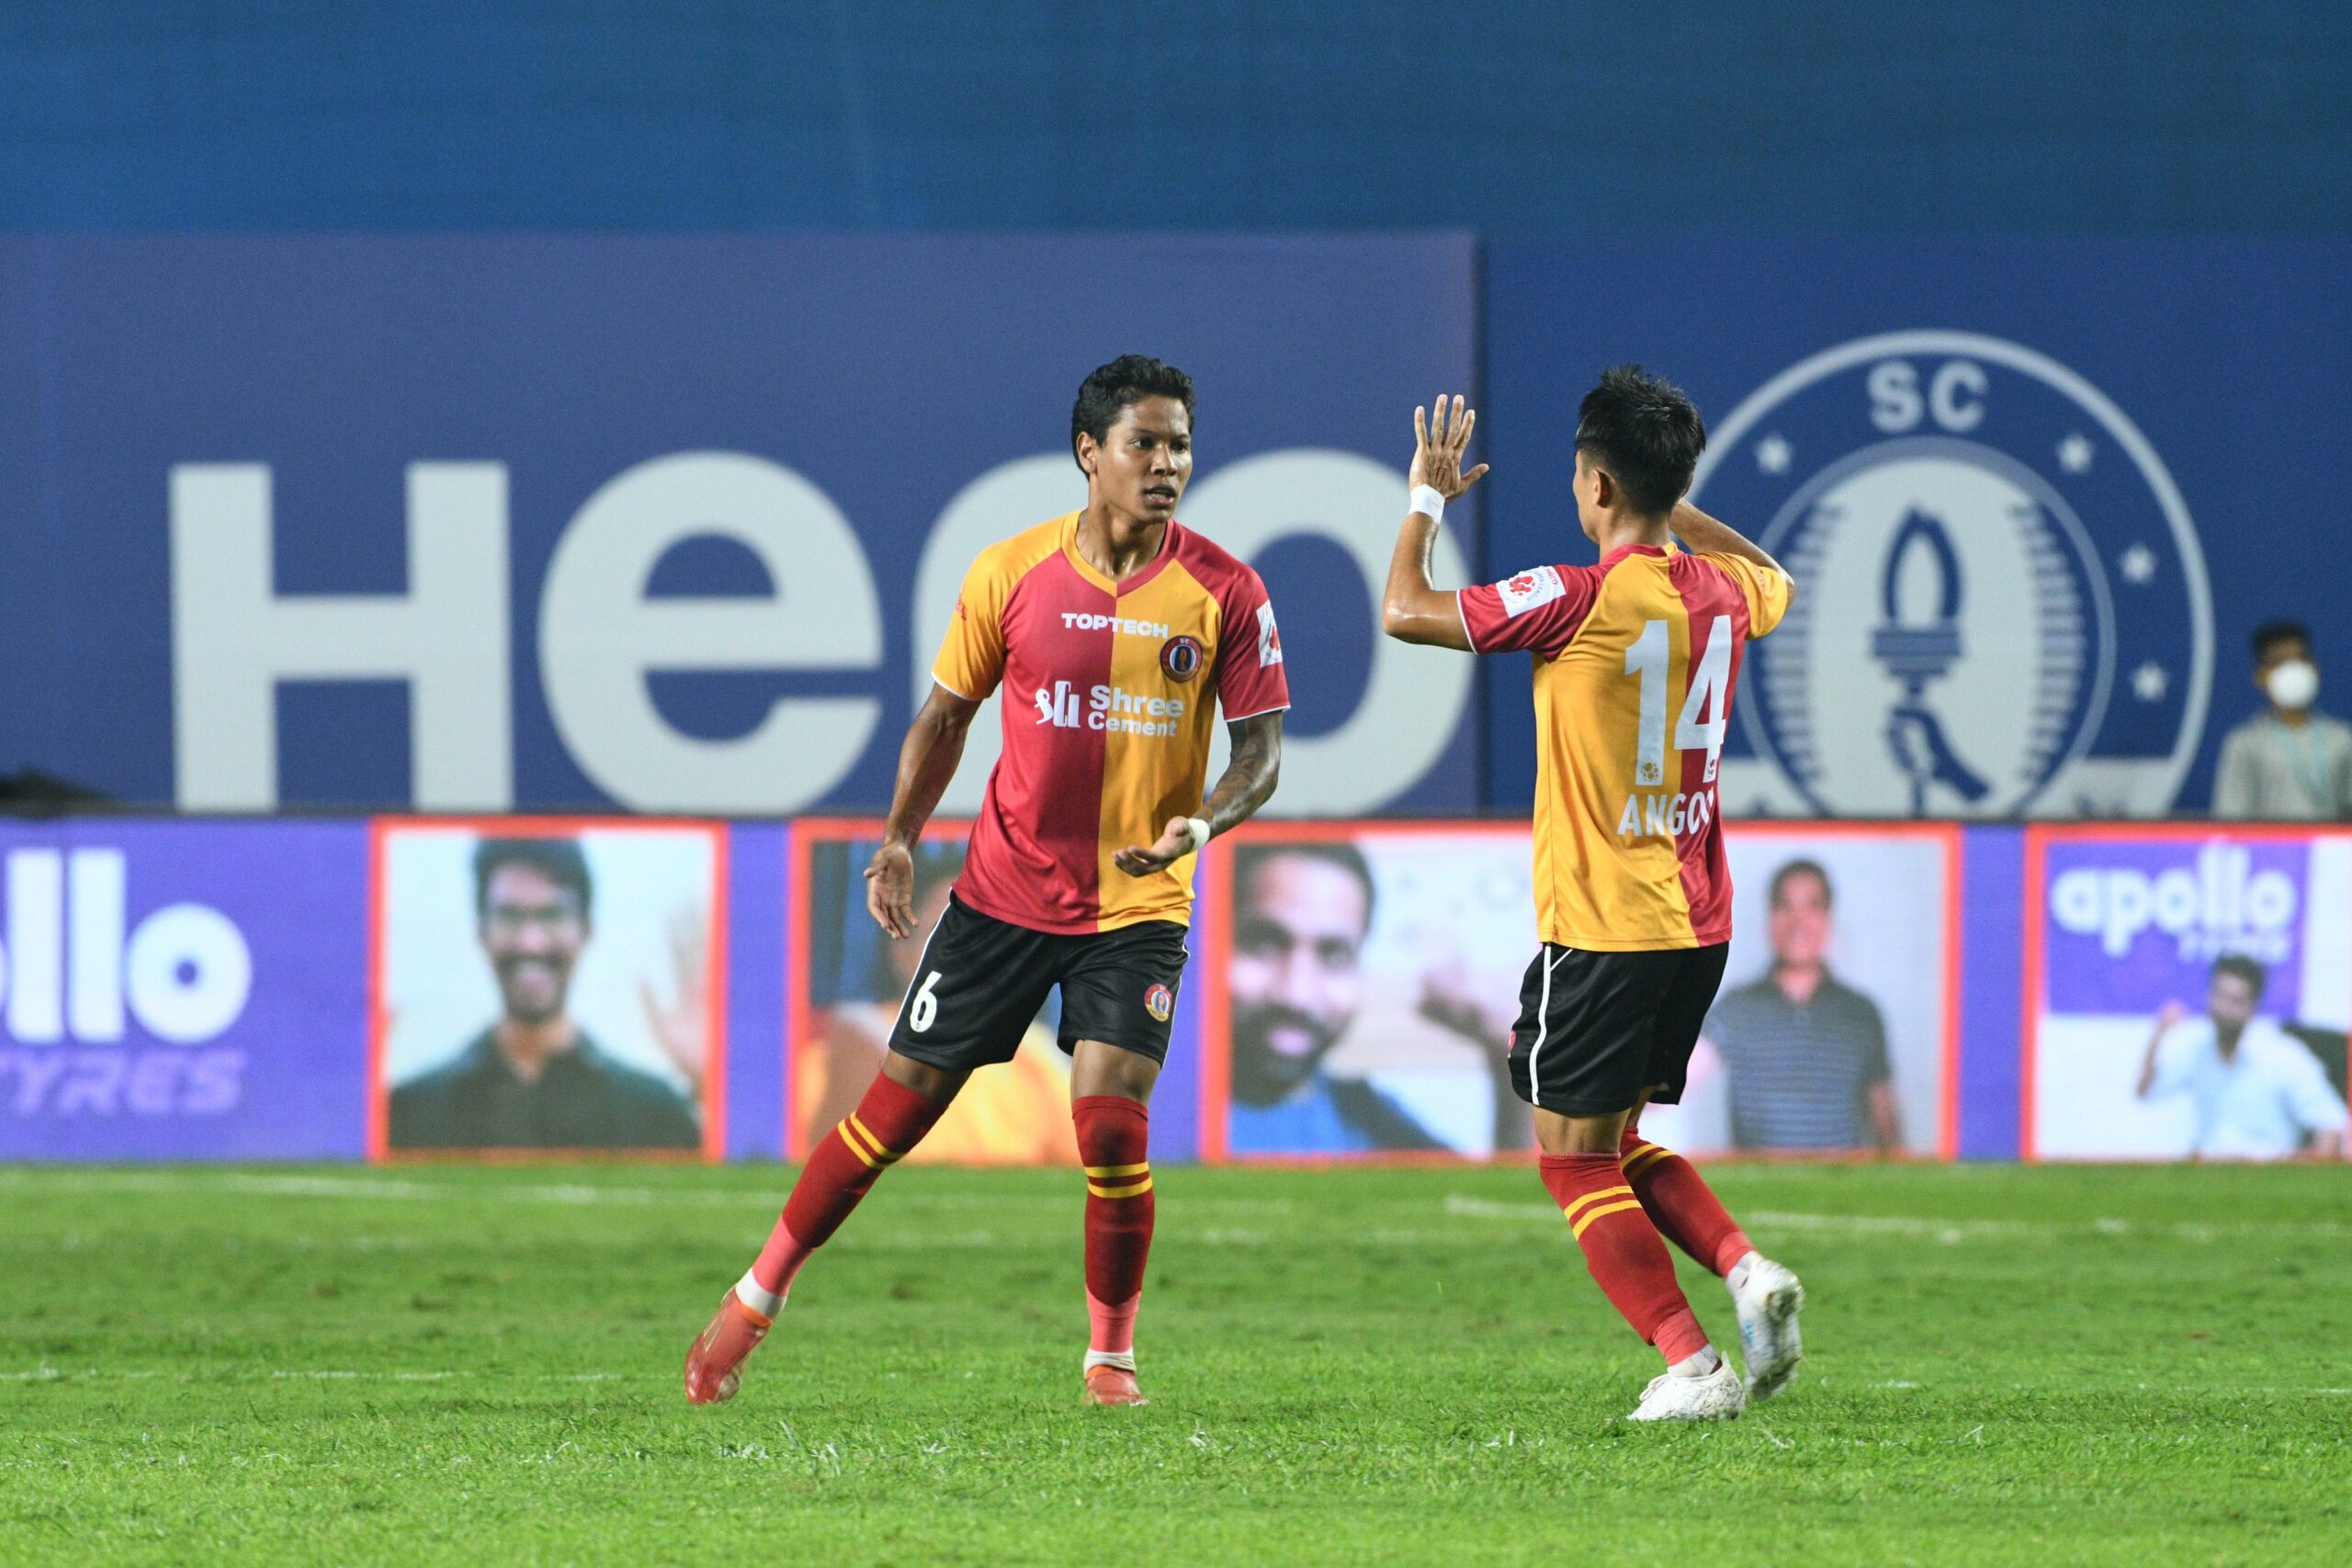 East Bengal vs Chennaiyin Match Result: SCEB 2-2 CFC; Hnamte's 90th minute equalizer helps SC East Bengal rescue a point against Chennaiyin FC 